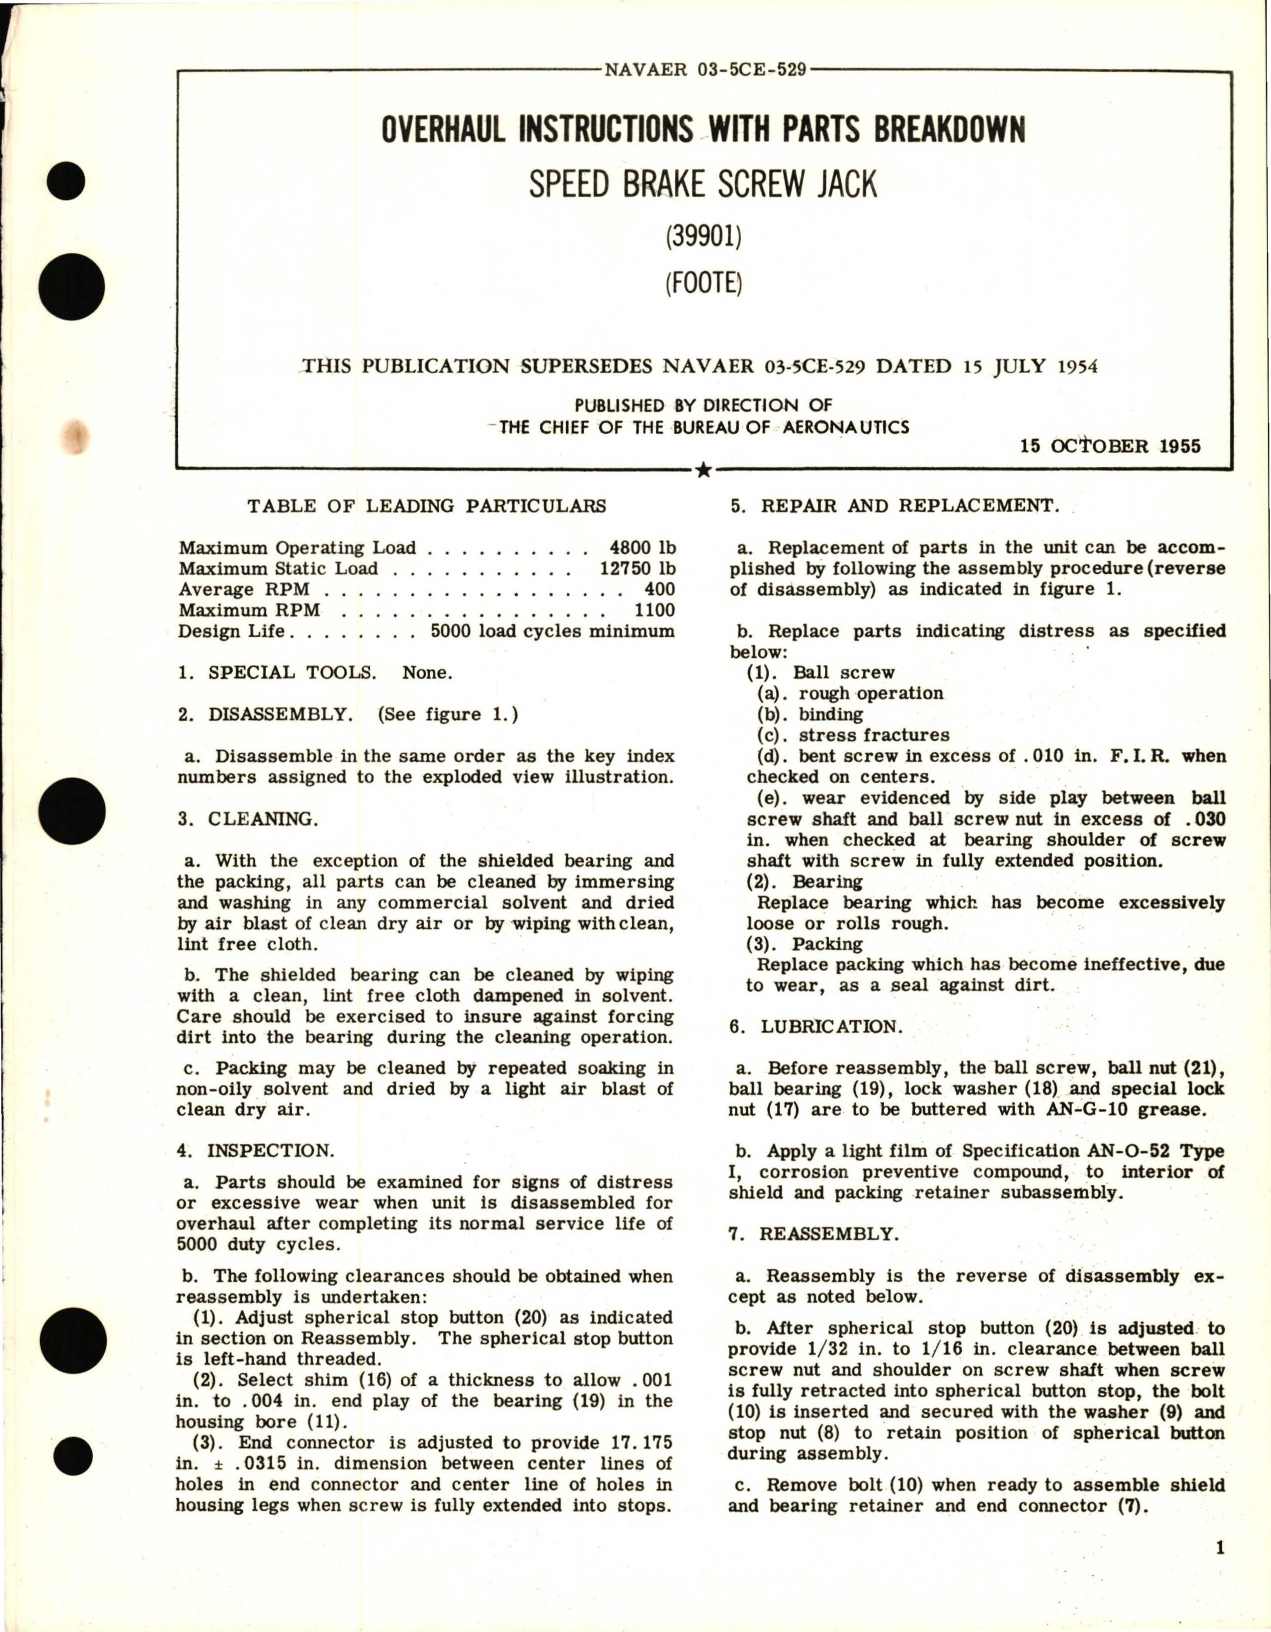 Sample page 1 from AirCorps Library document: Overhaul Instructions with Parts Breakdown for Speed Brake Screw Jack - 39901 